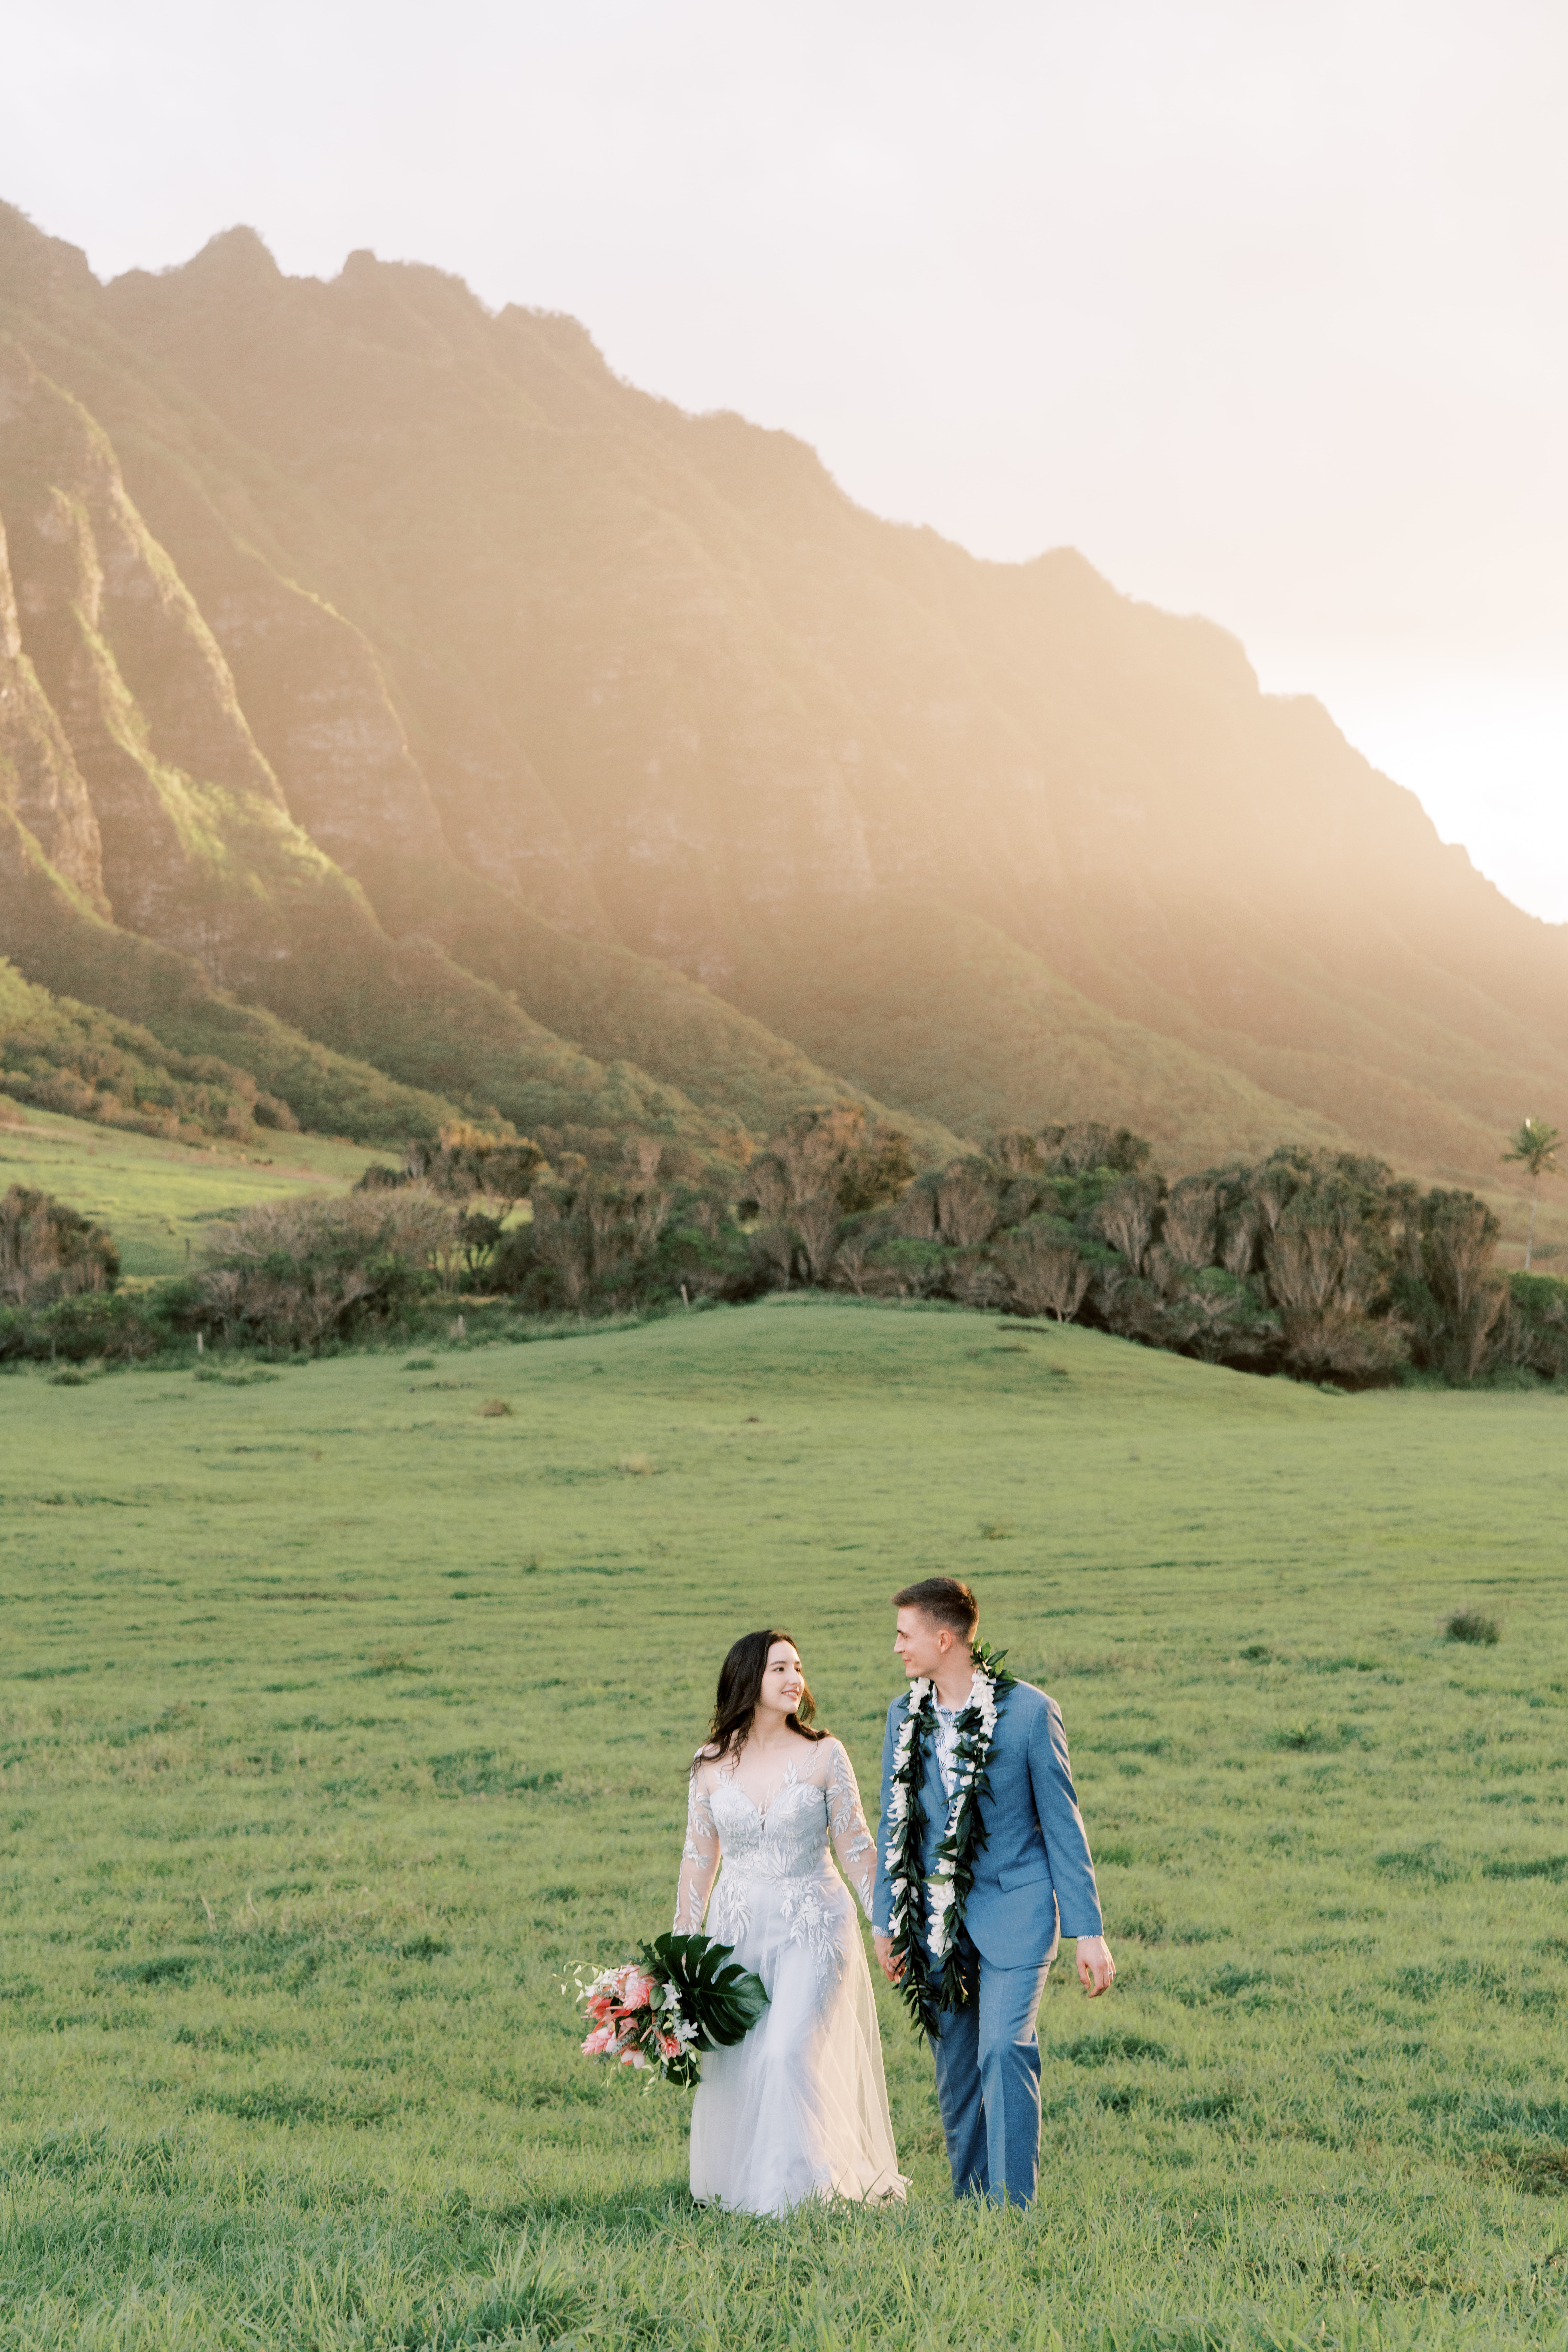 A bride and groom walking through a grassy field at Kualoa Ranch, with mountains in the background.